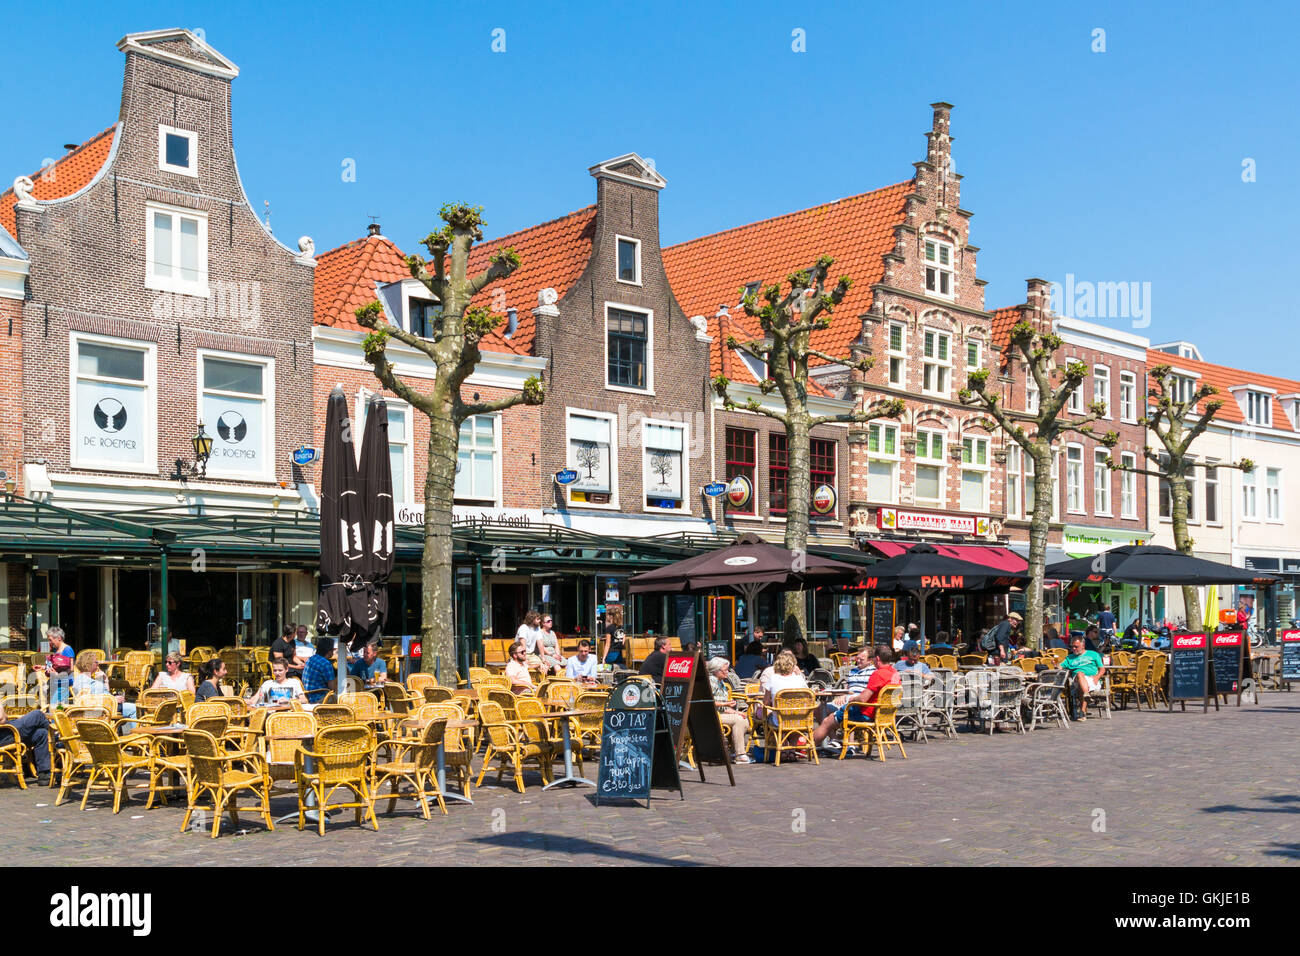 People enjoying vacation on outdoor sidewalk cafes on Botermarkt square in old town of Haarlem, Holland, Netherlands Stock Photo